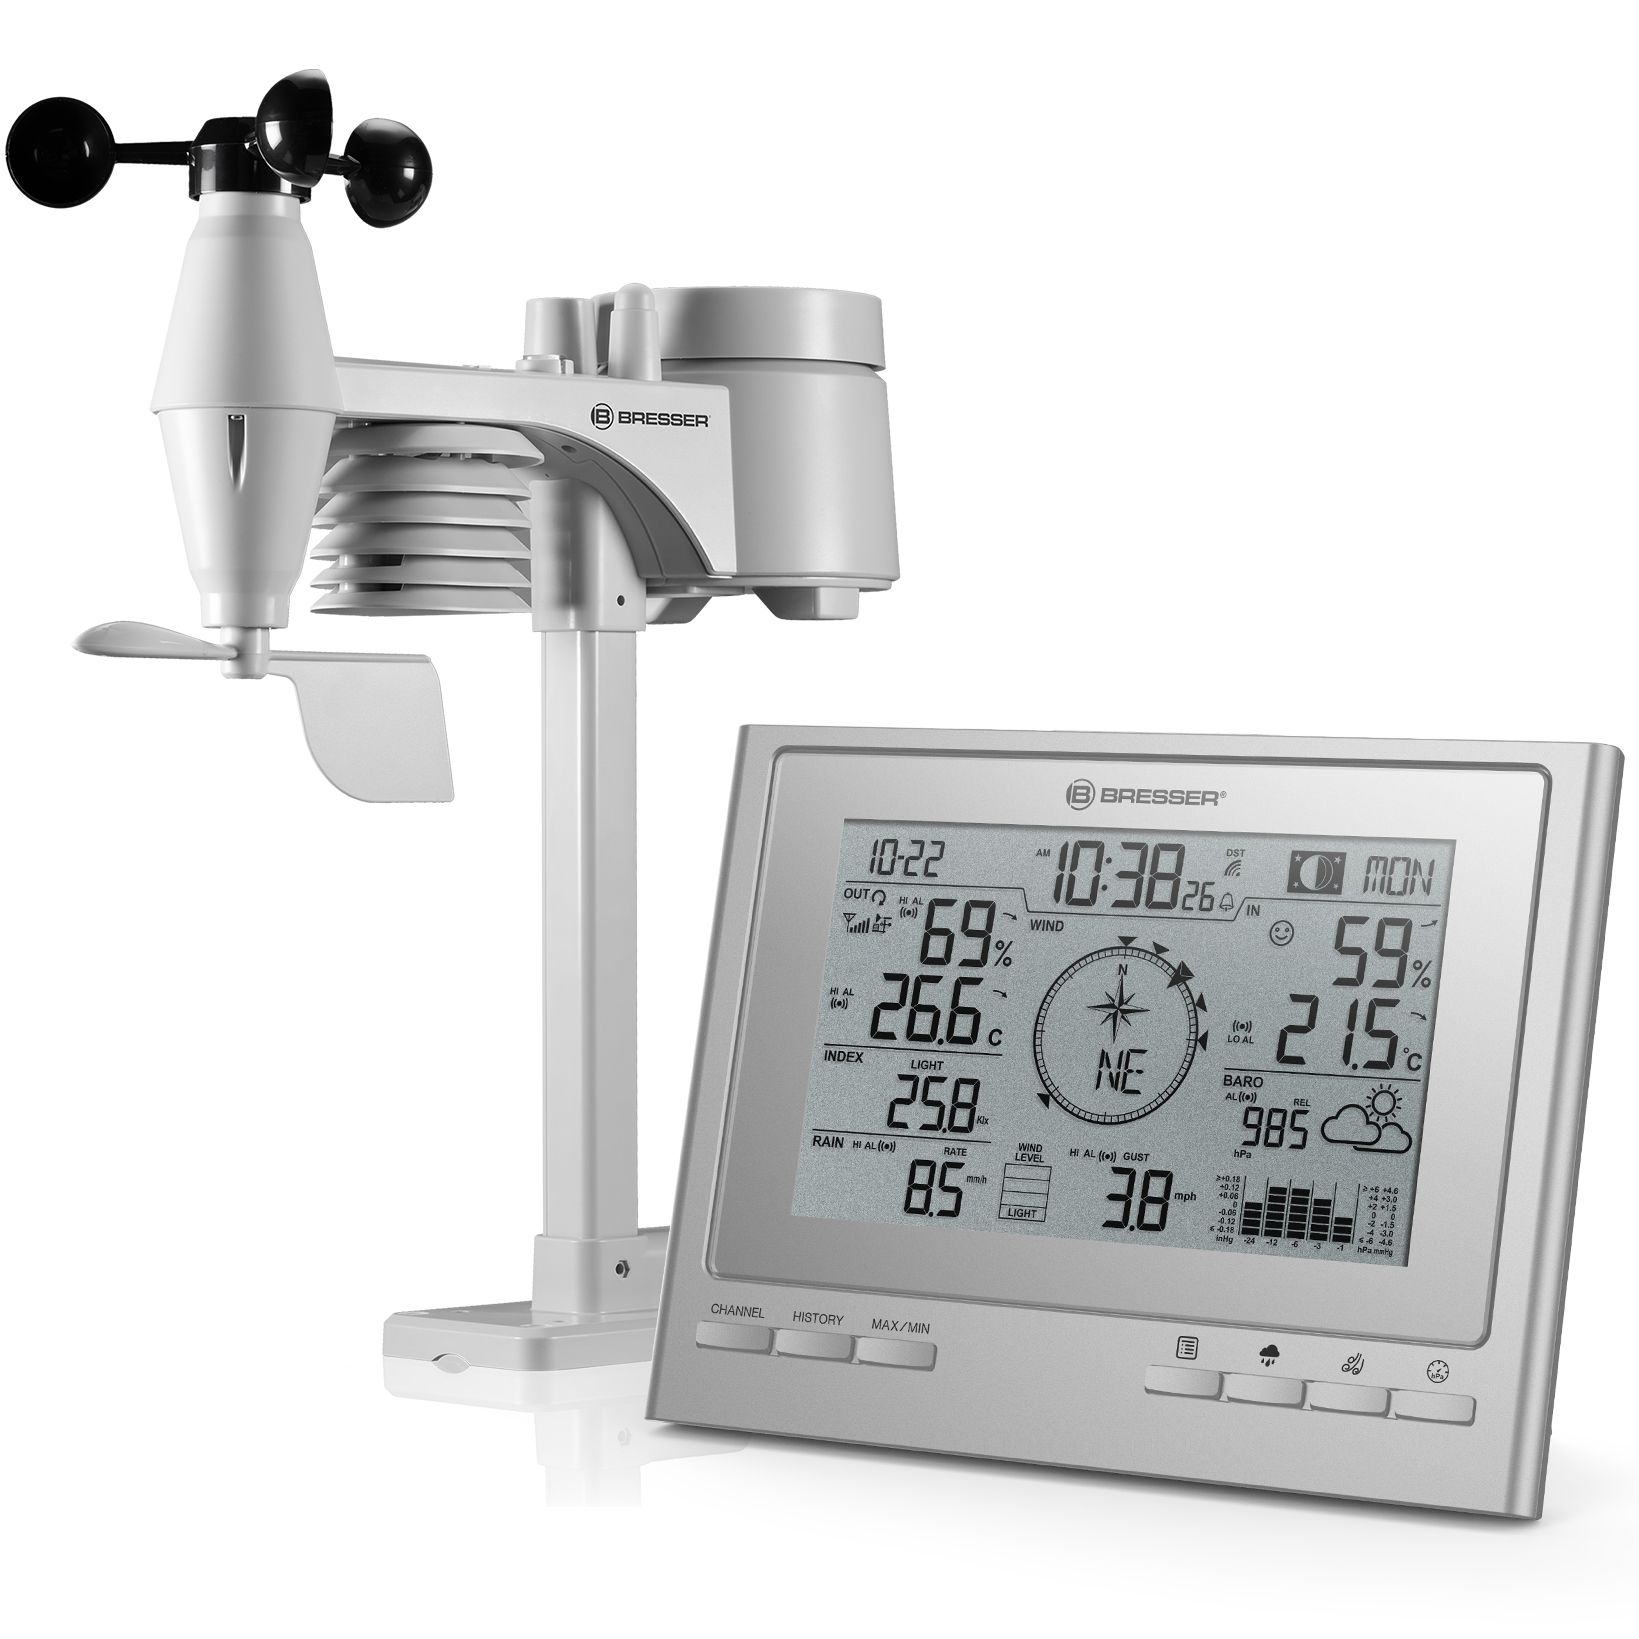 BRESSER Exklusive Wetterstation ClimateScout Funk 7-in-1